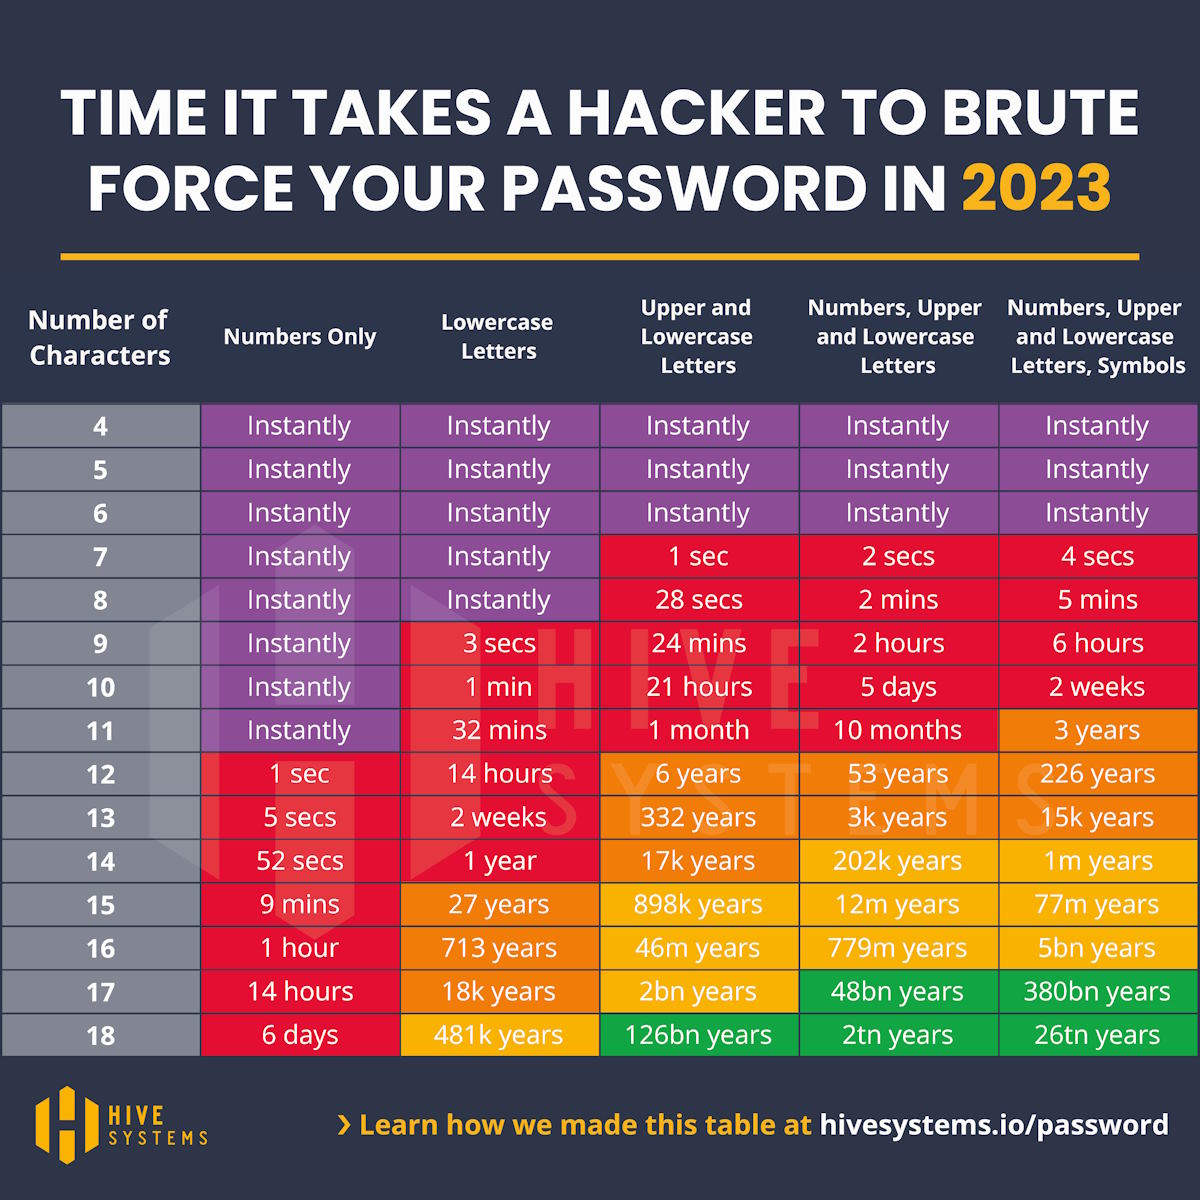 time it takes a hacker to brute force your password in 2023 chart by hive systems